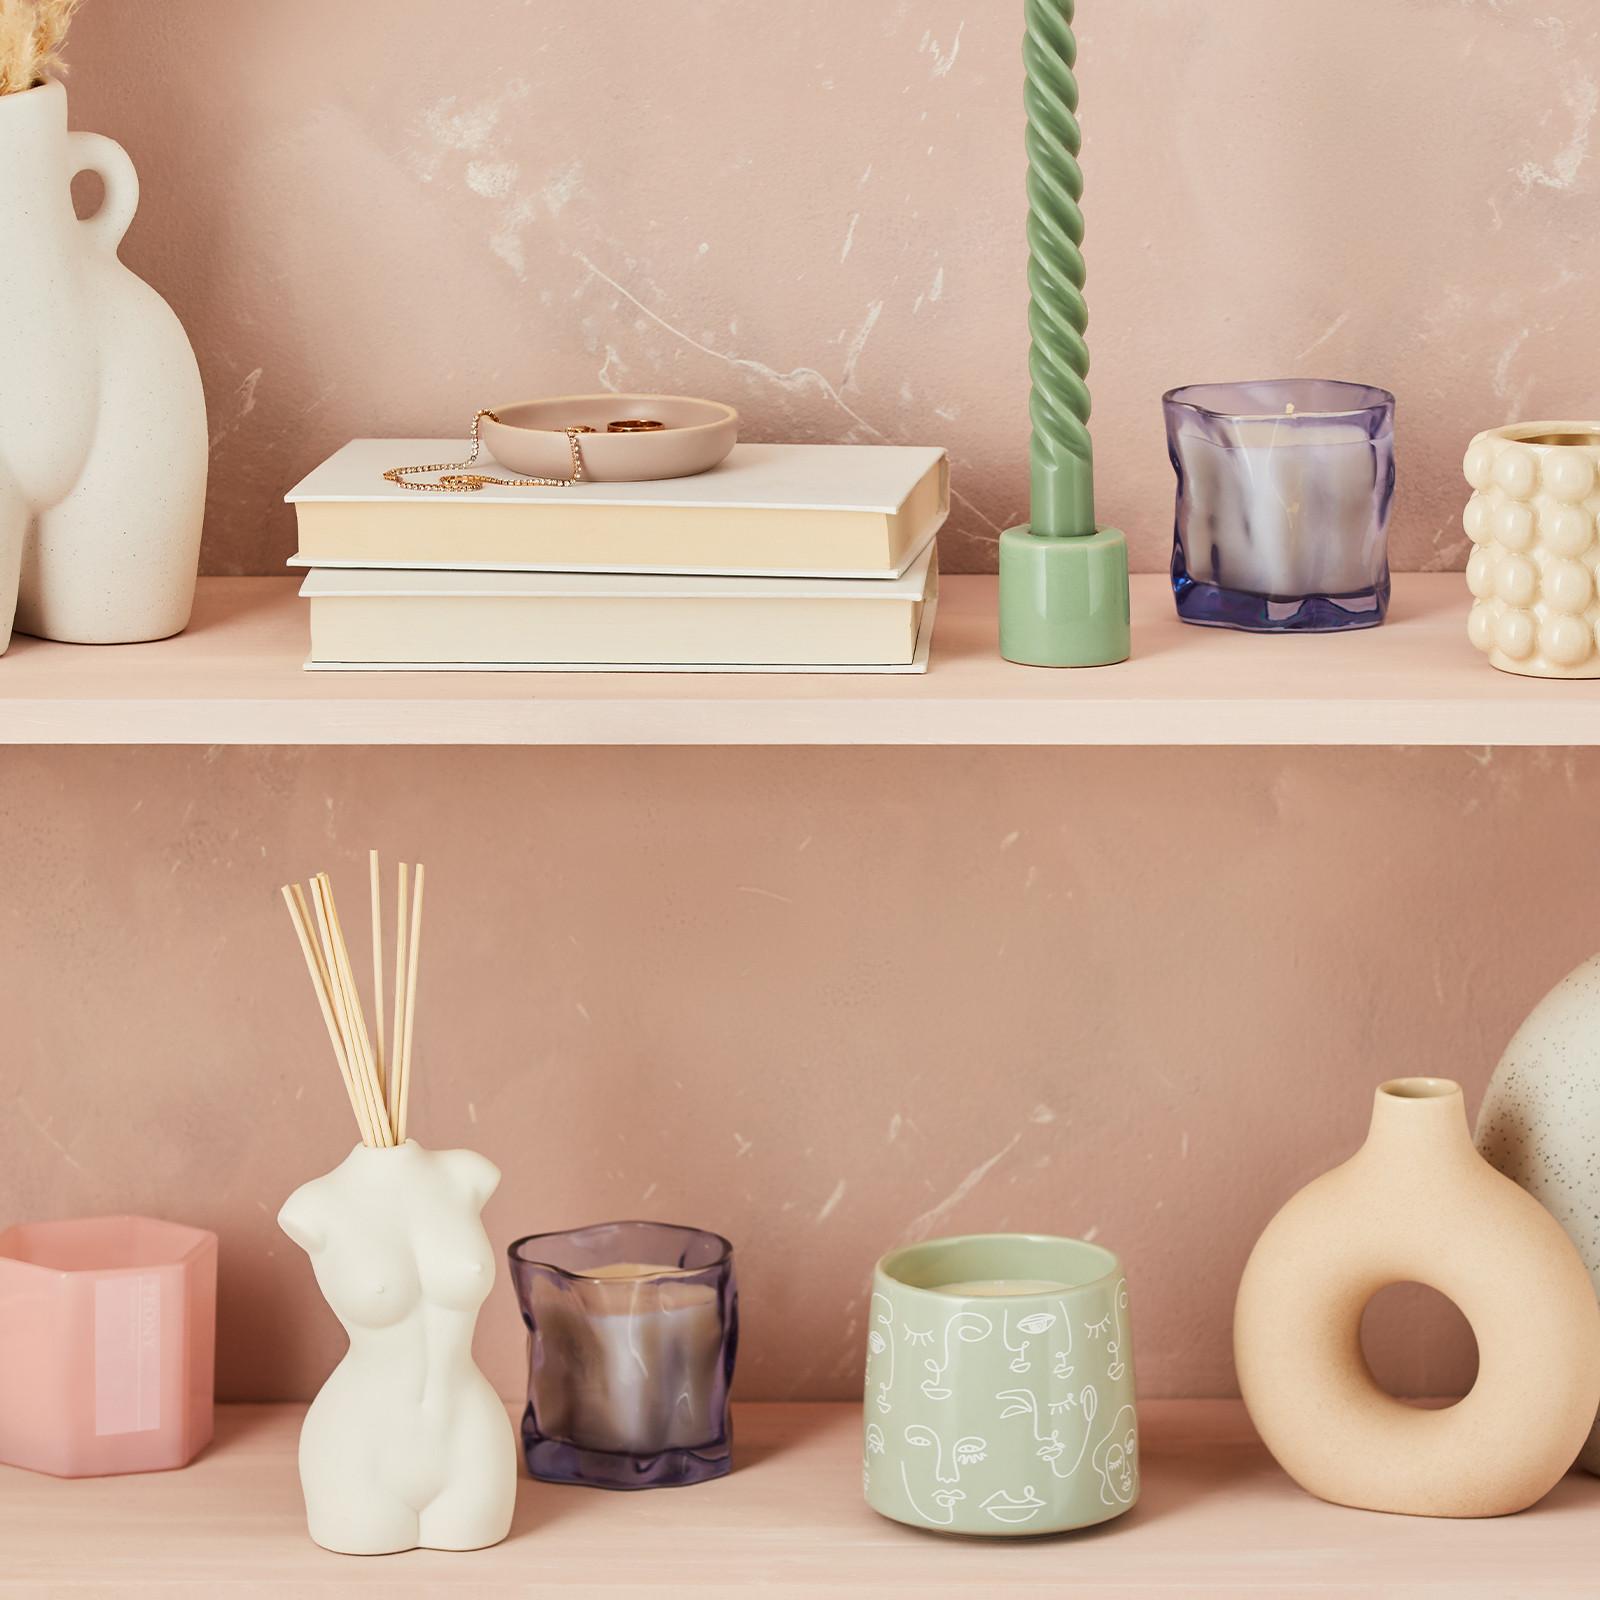 Soothing Pastel Decor